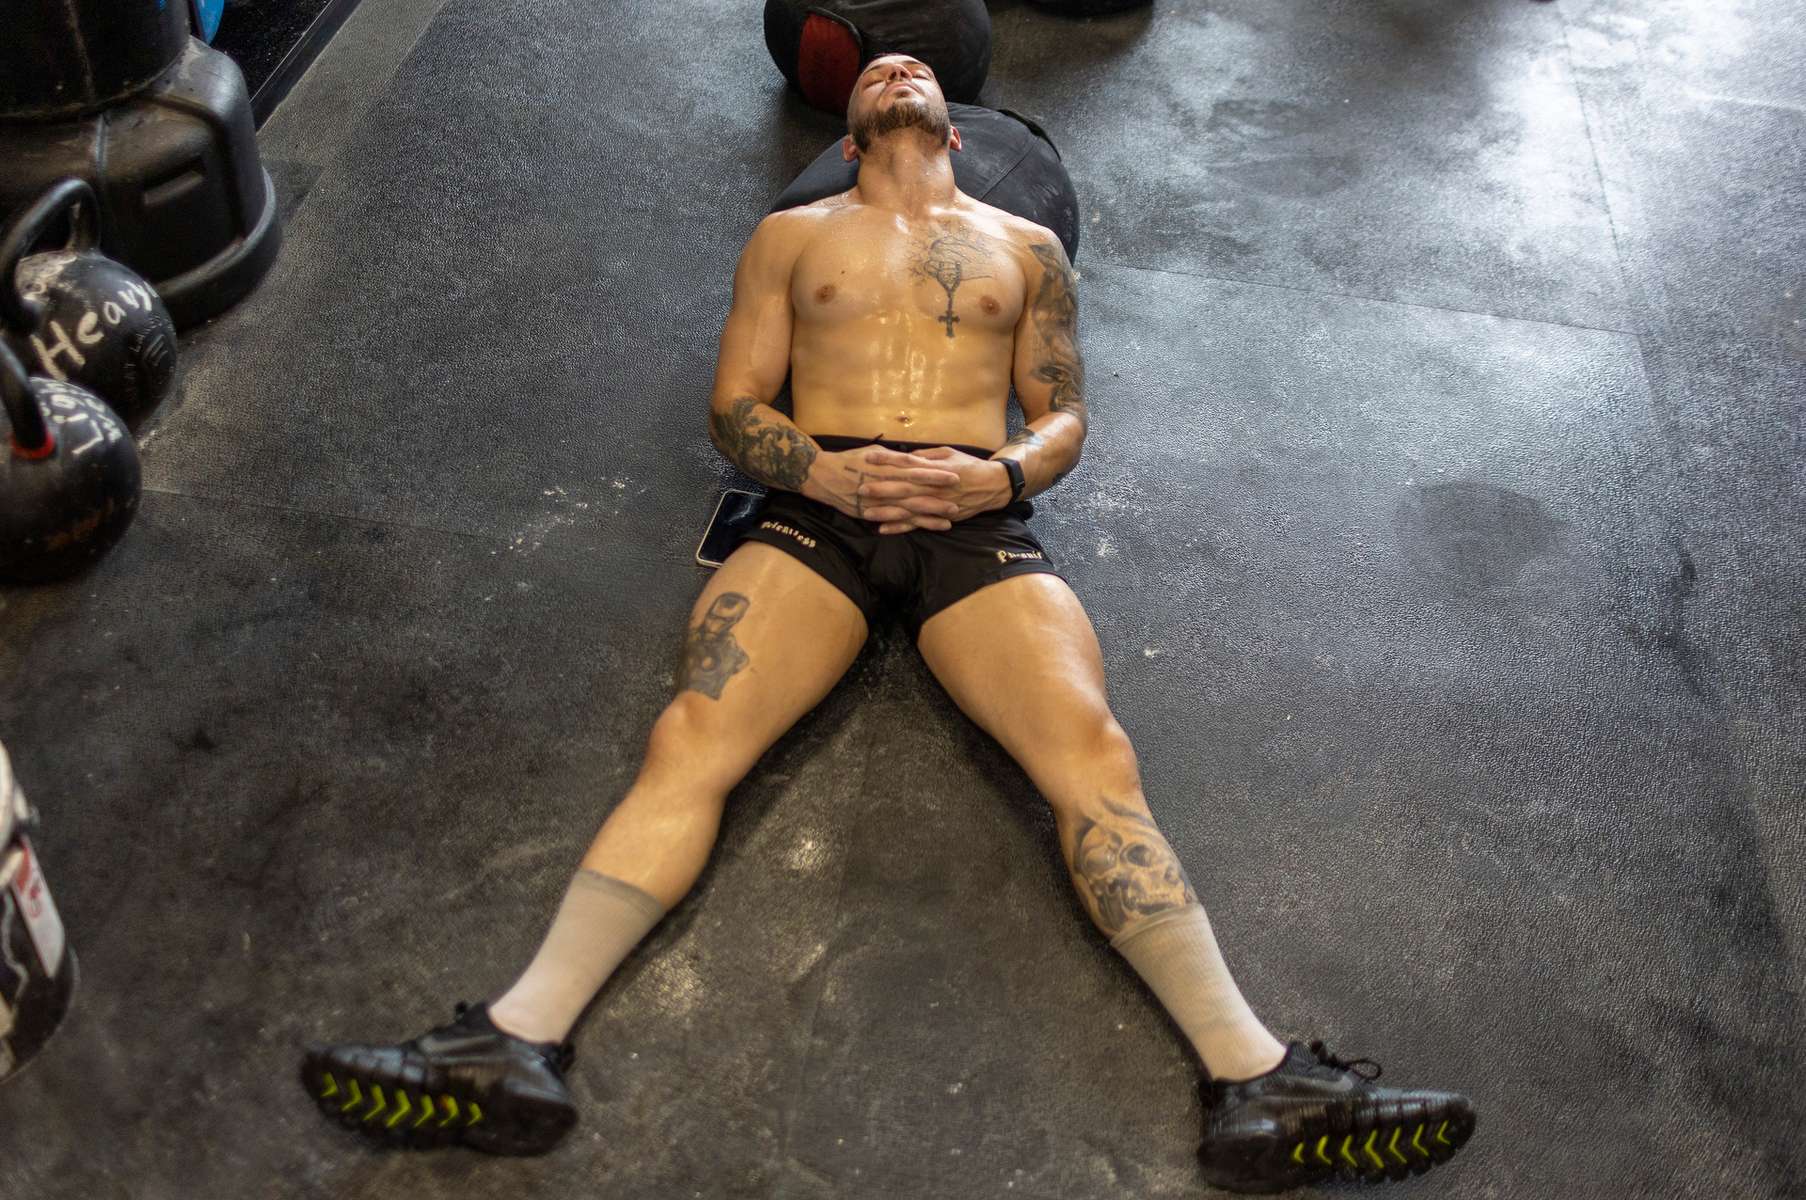 Thomas De Giuli, lies exhausted after a workout at the gym he owns called the Strength Factory on July 18, 2022 in Baldwin, New York.  The workouts are led by De Giuli and the athletes he trains use unconventional fitness training methods when they exercise.  